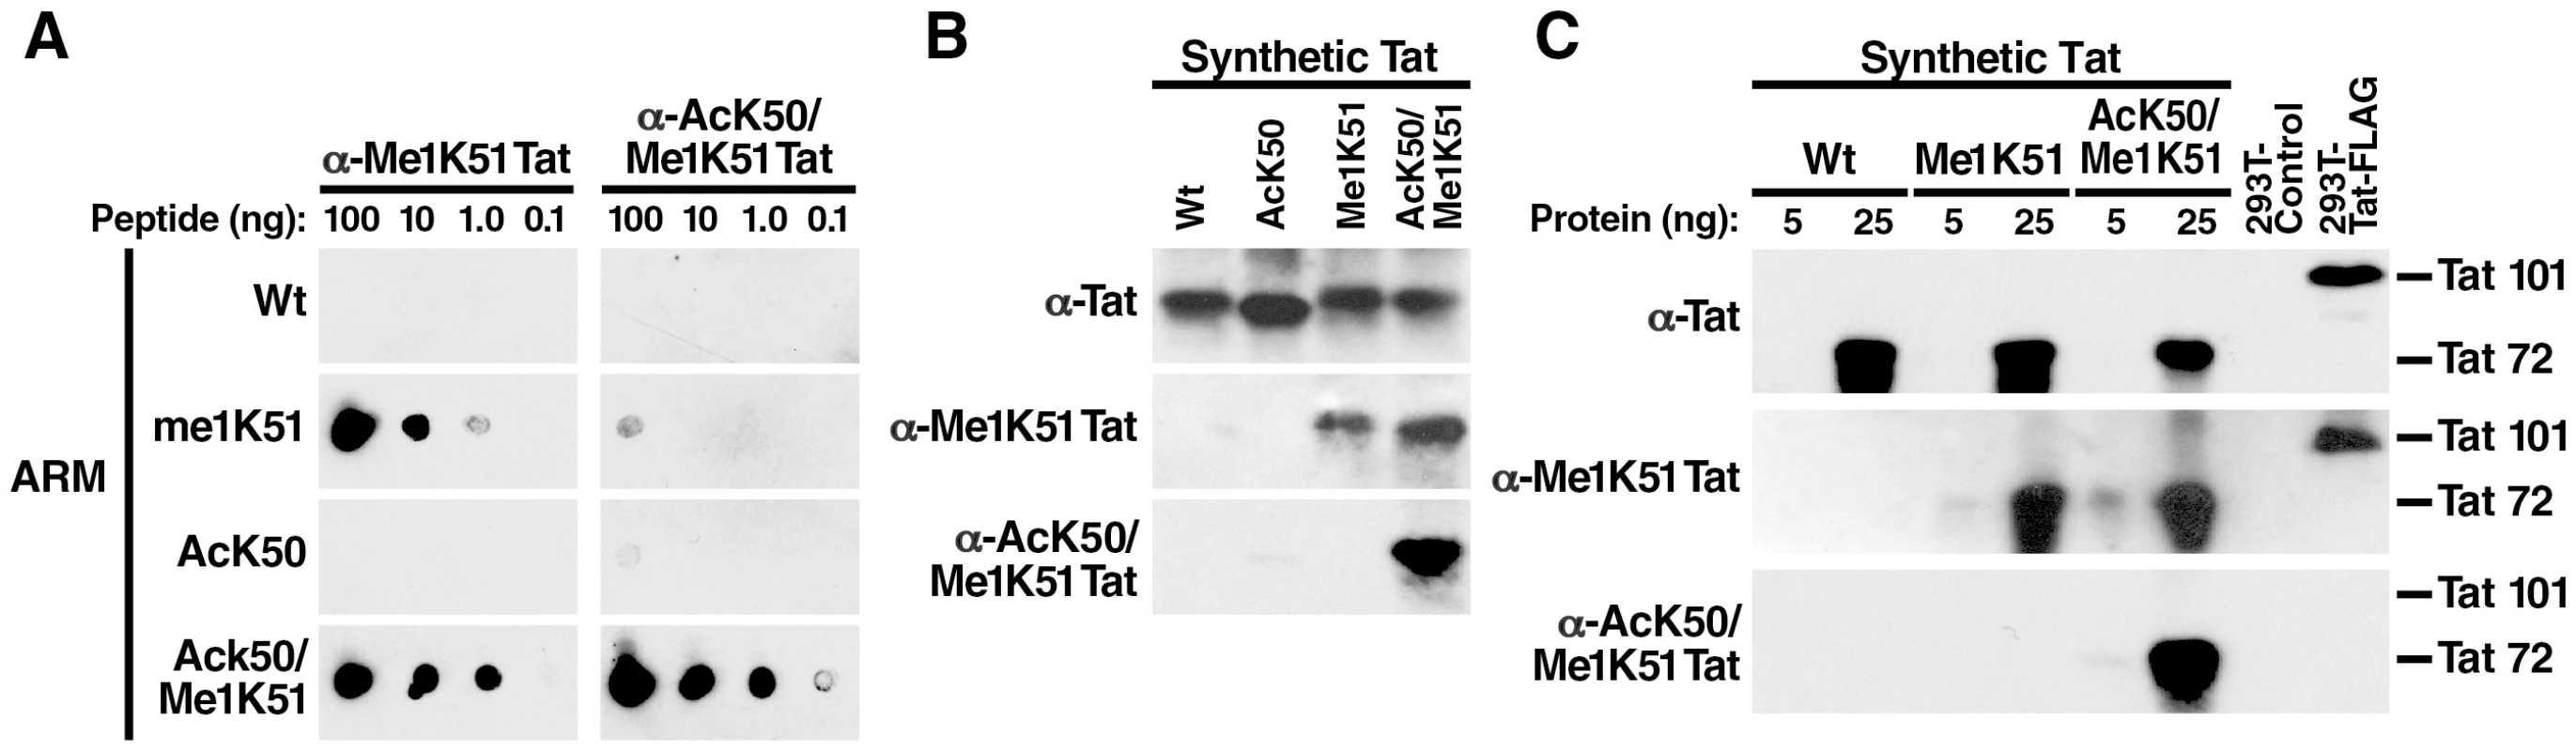 No detection of cellular acetylated/methylated Tat by newly generated Tat antibodies.